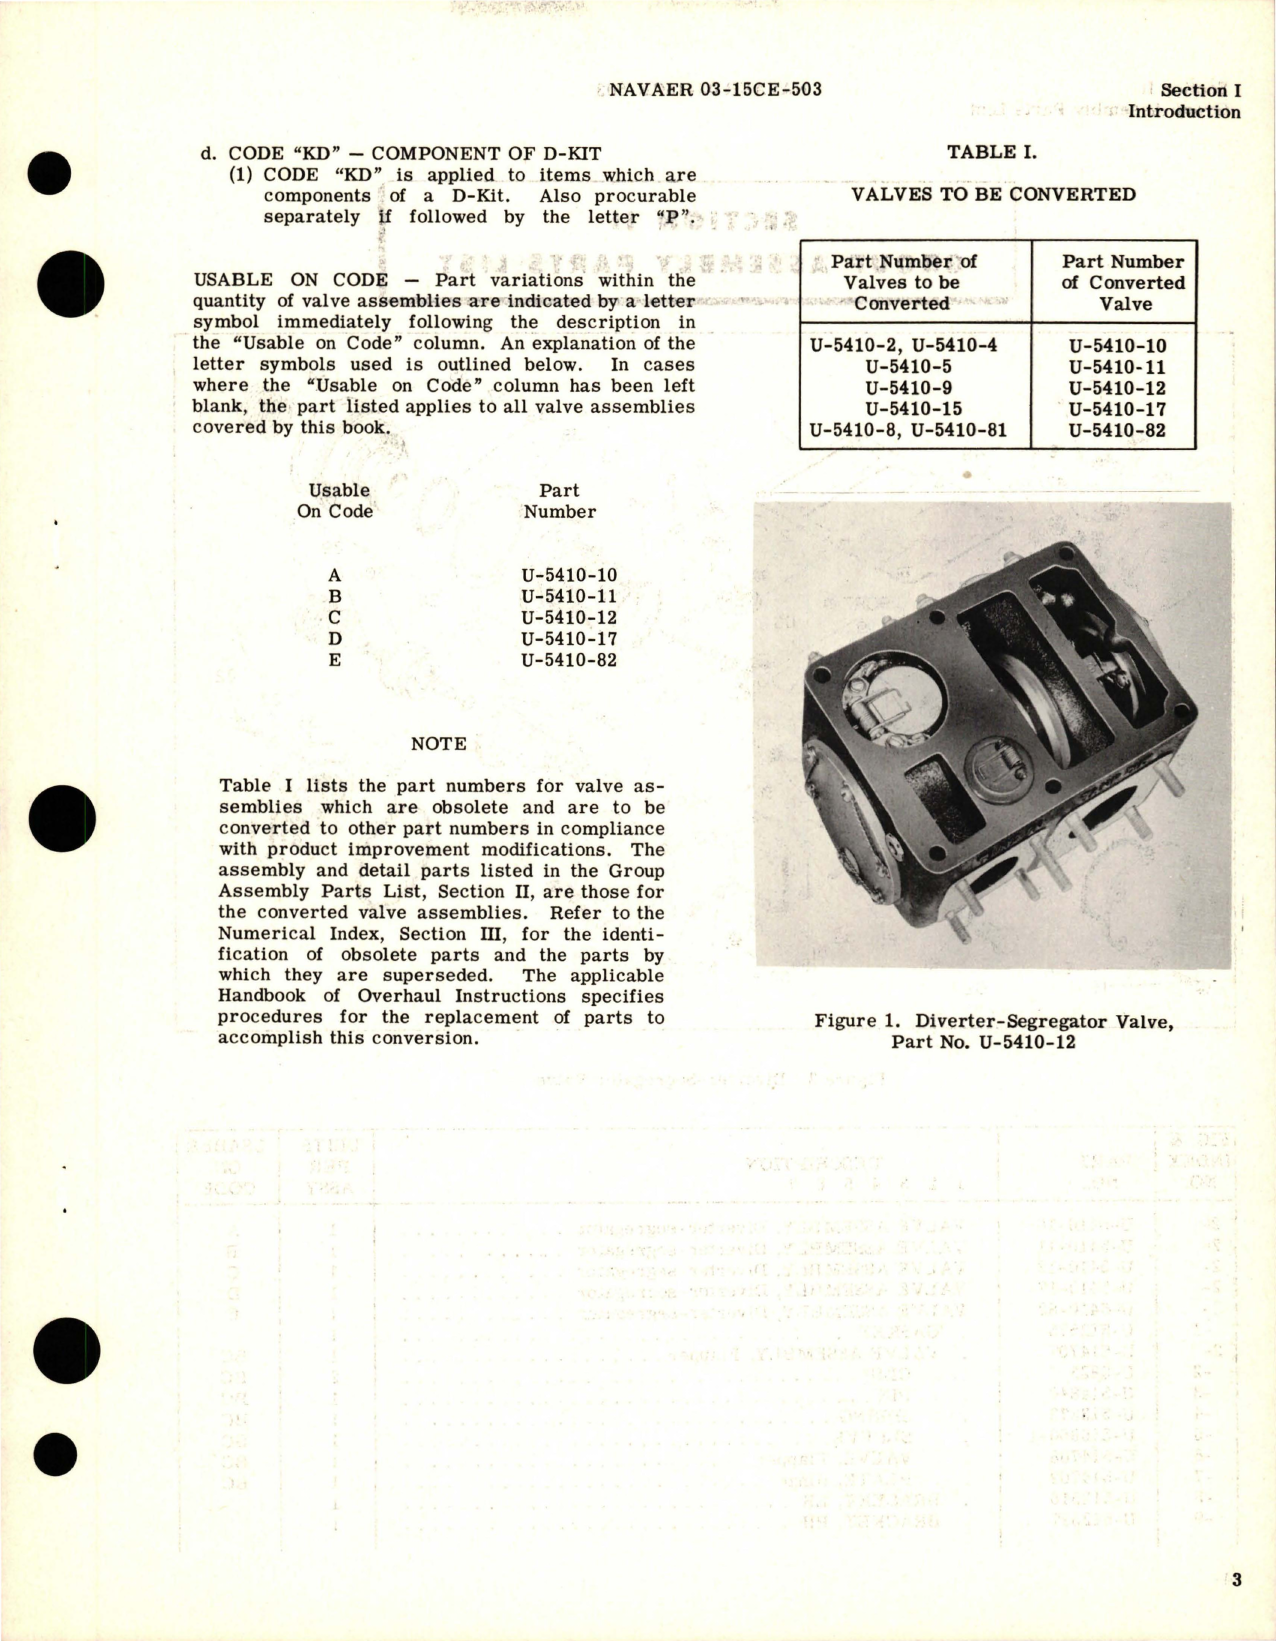 Sample page 5 from AirCorps Library document: Illustrated Parts Breakdown for Diverter Segregator Valve Assemblies